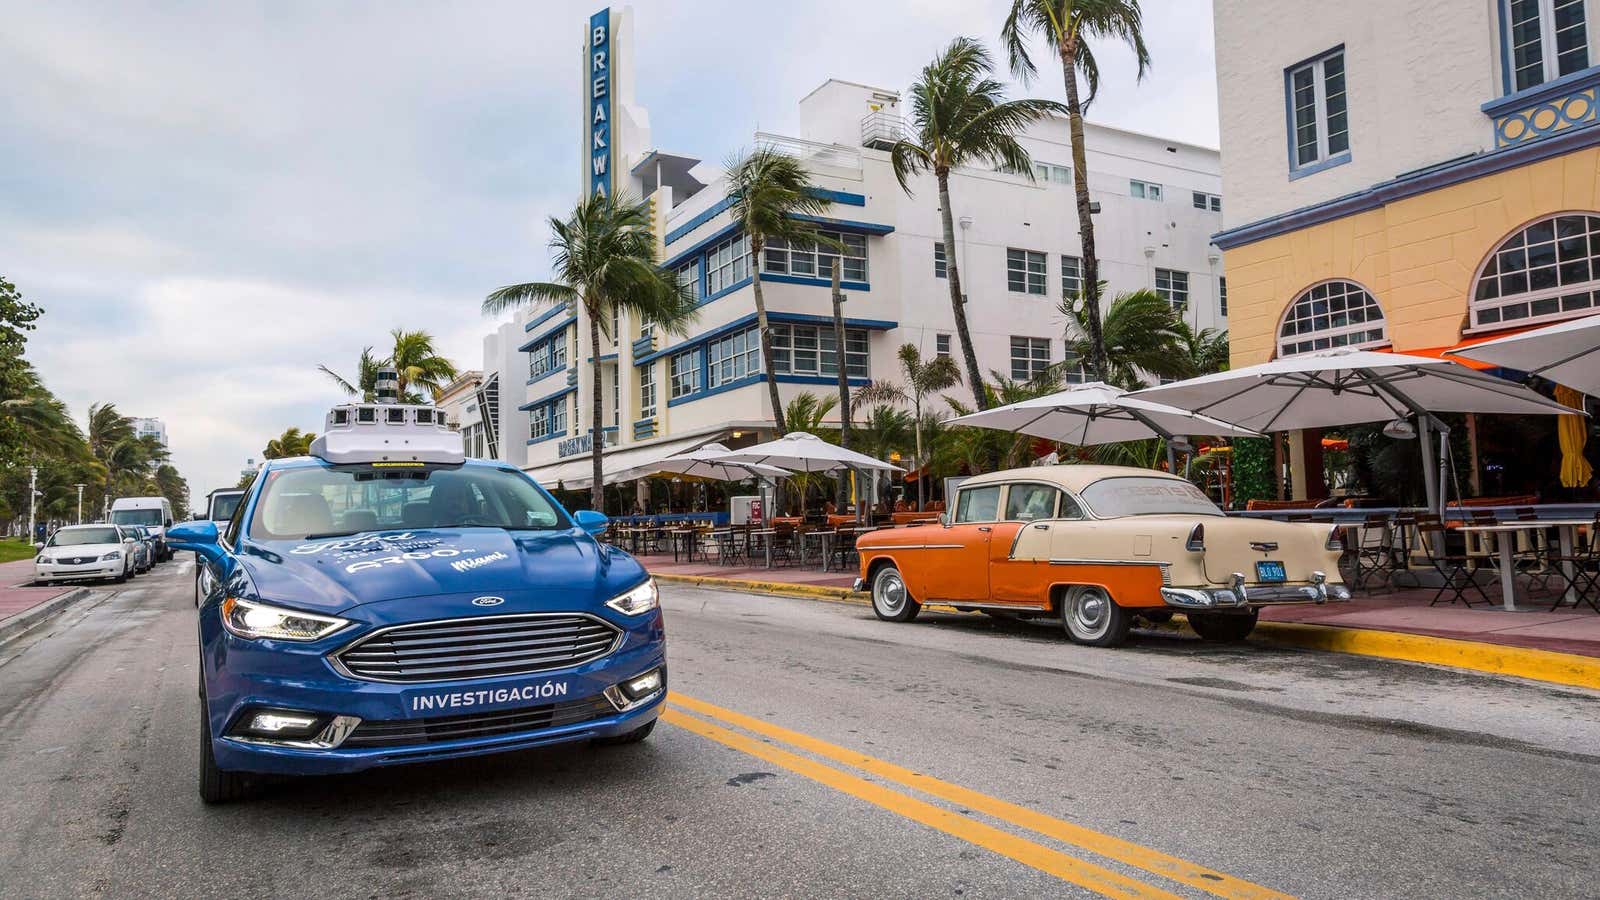 A Ford autonomous vehicle roaming the streets of Miami.